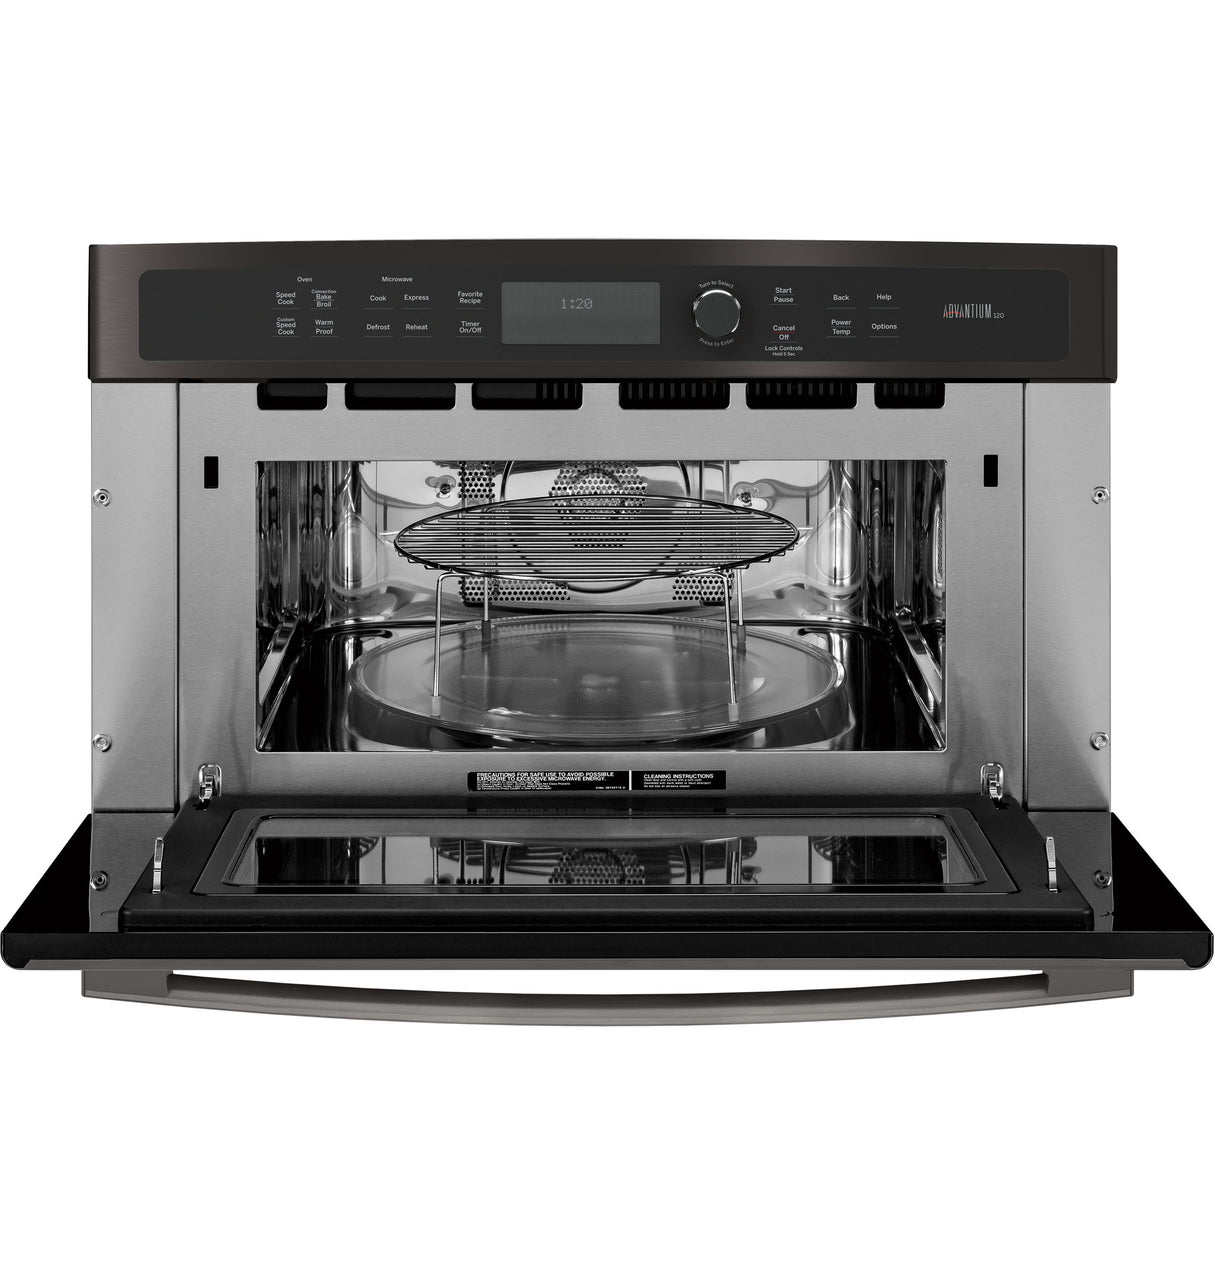 GE Profile(TM) 30 in. Single Wall Oven with Advantium(R) Technology - (PSB9120BLTS)